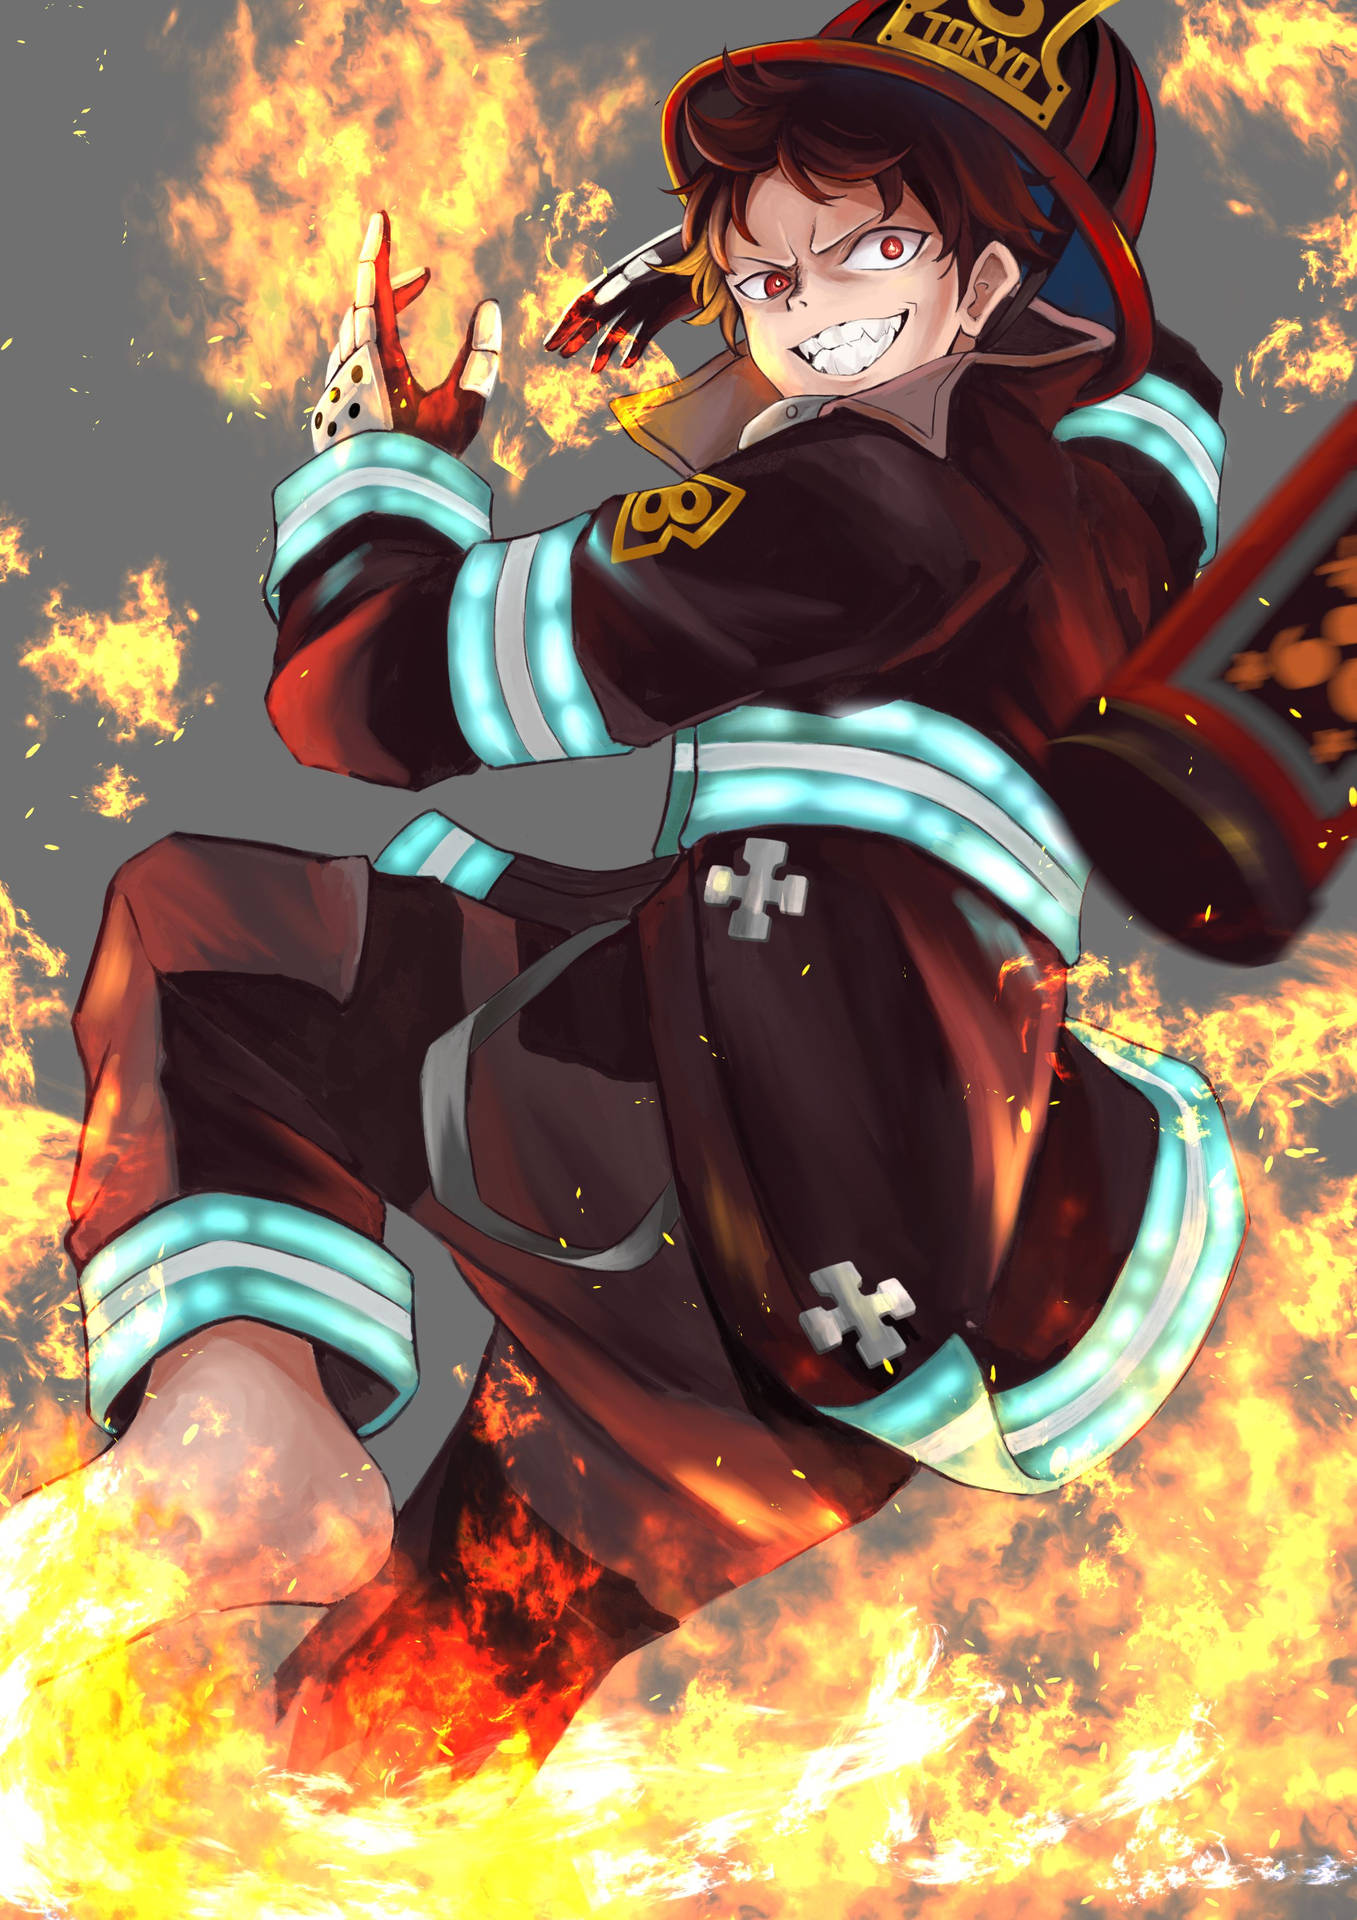 The Fire Force's brave Shinra Kusakabe, ready to fight evil. Wallpaper